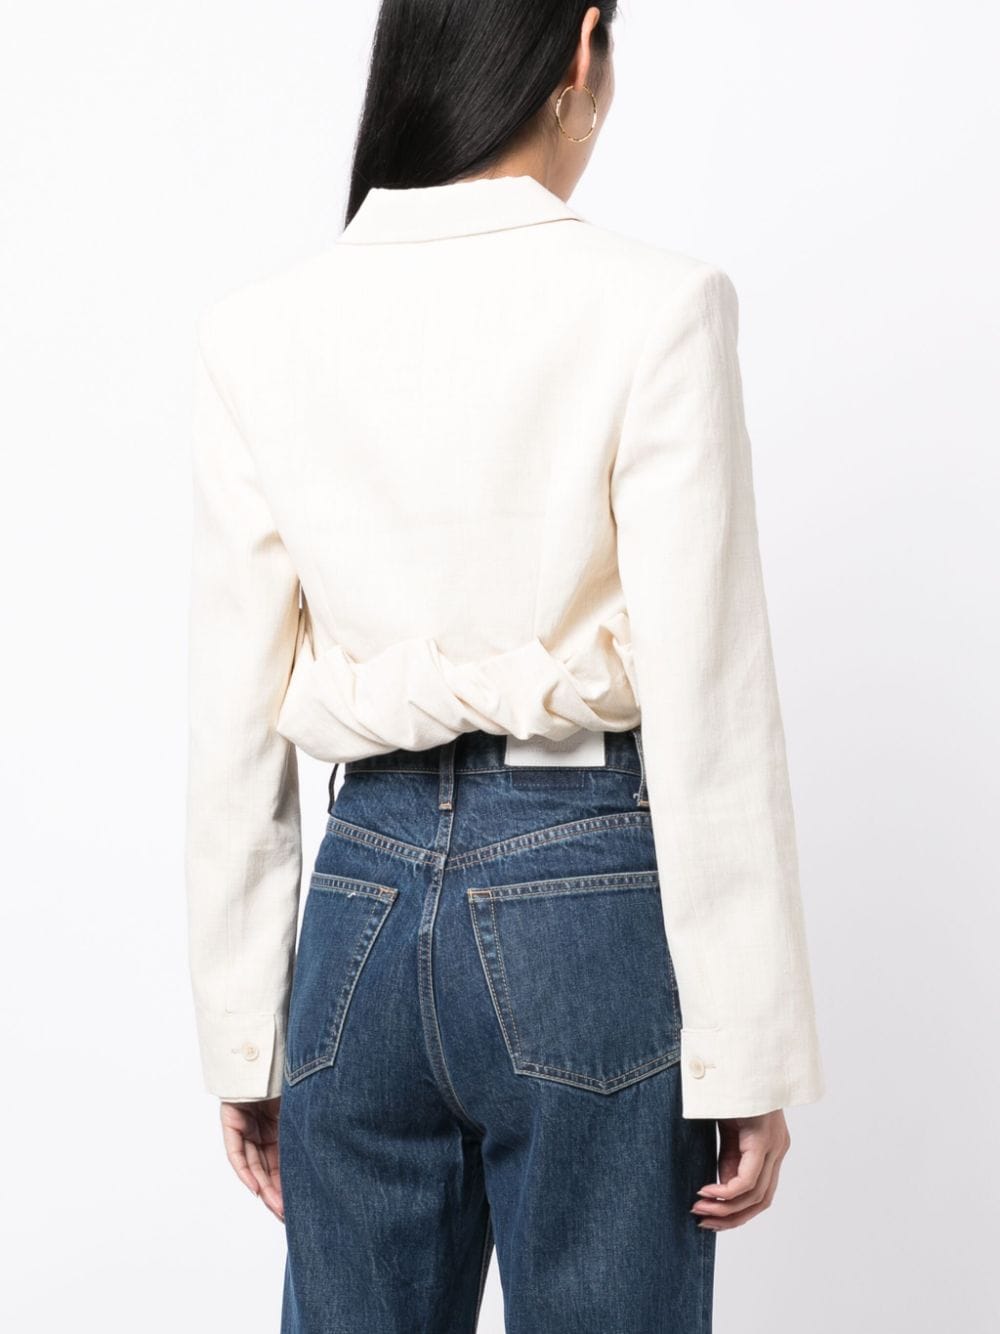 Off-White Croissant Cropped Blazer for Women in Jacquemus' FW23 Collection